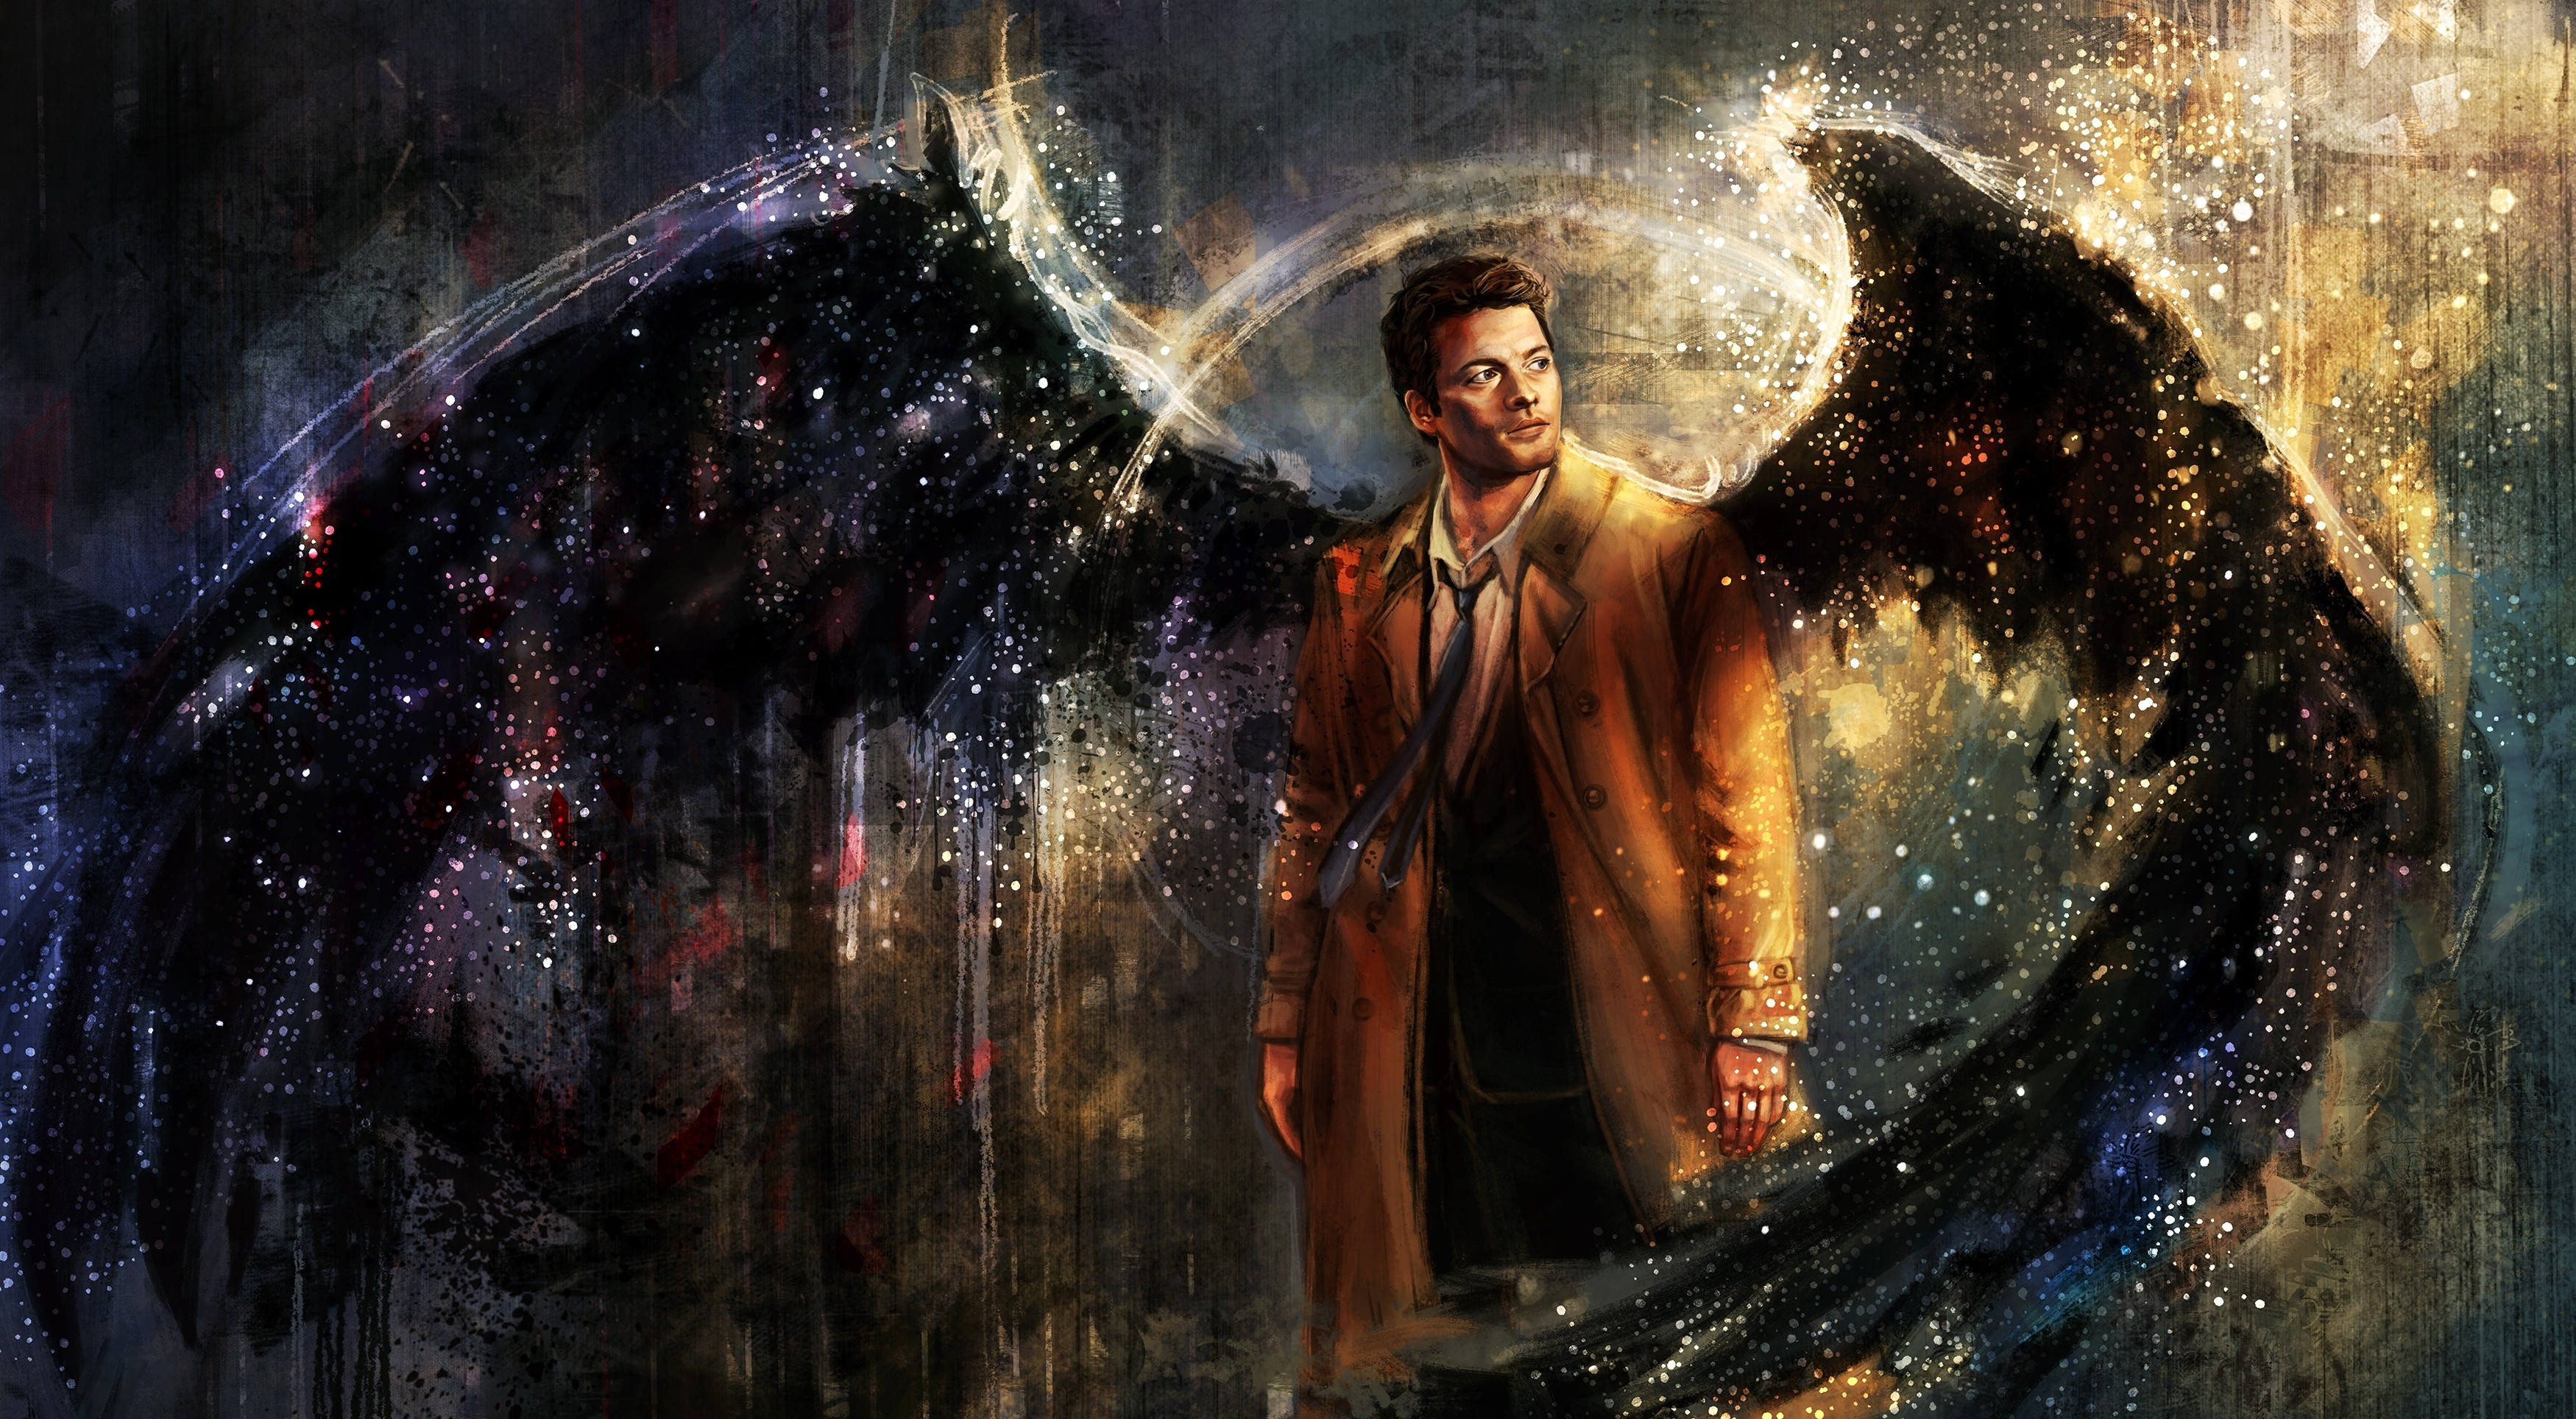 3500x1928 Wallpaper : drawing, painting, wings, artwork, mythology, Supernatural, Castiel, darkness, fictional character, special effects BoSsFiNaL4sRaT 153254 HD Wallpapers